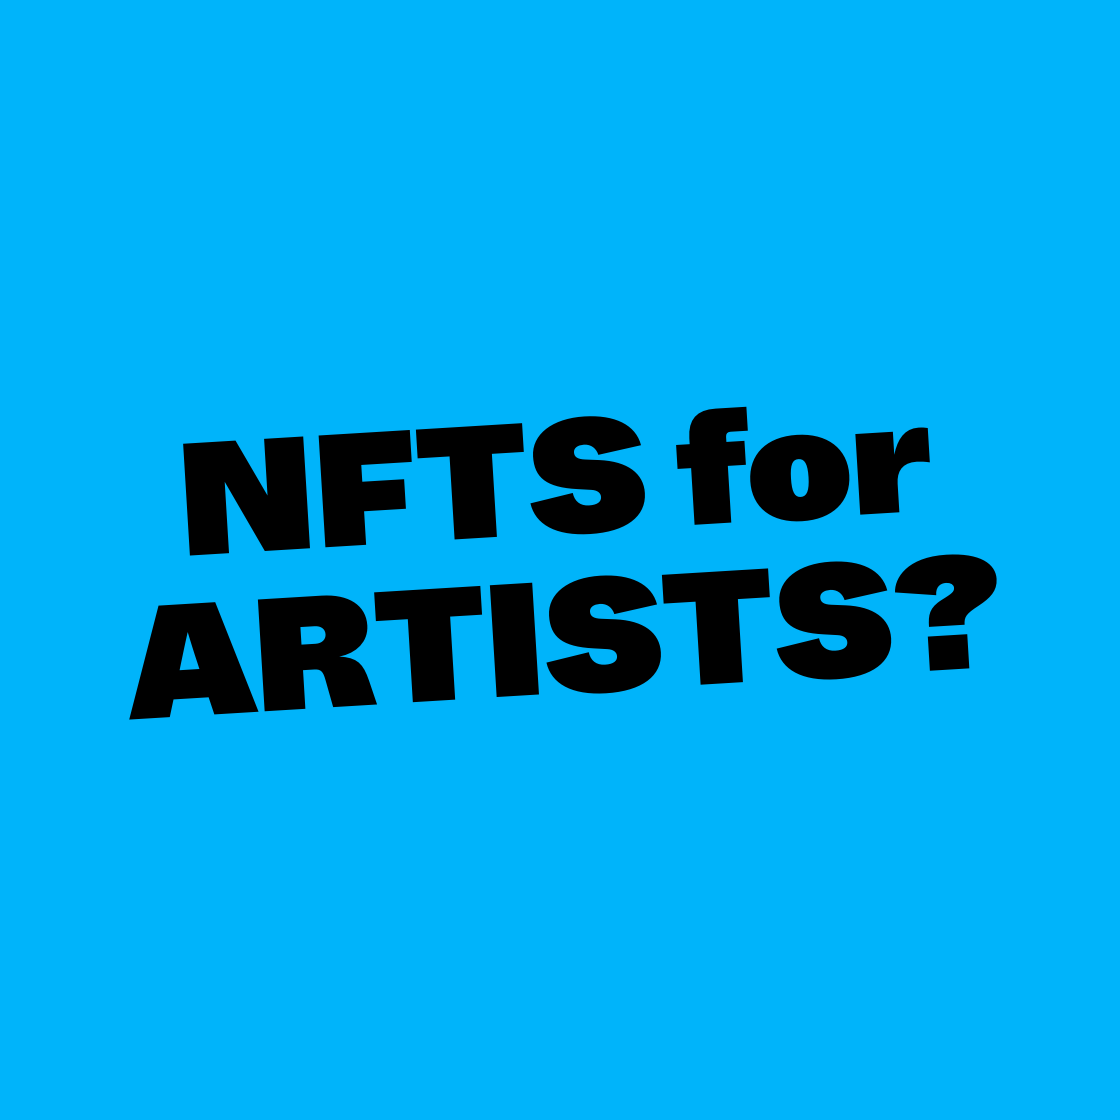 NFTS for ARTISTS?